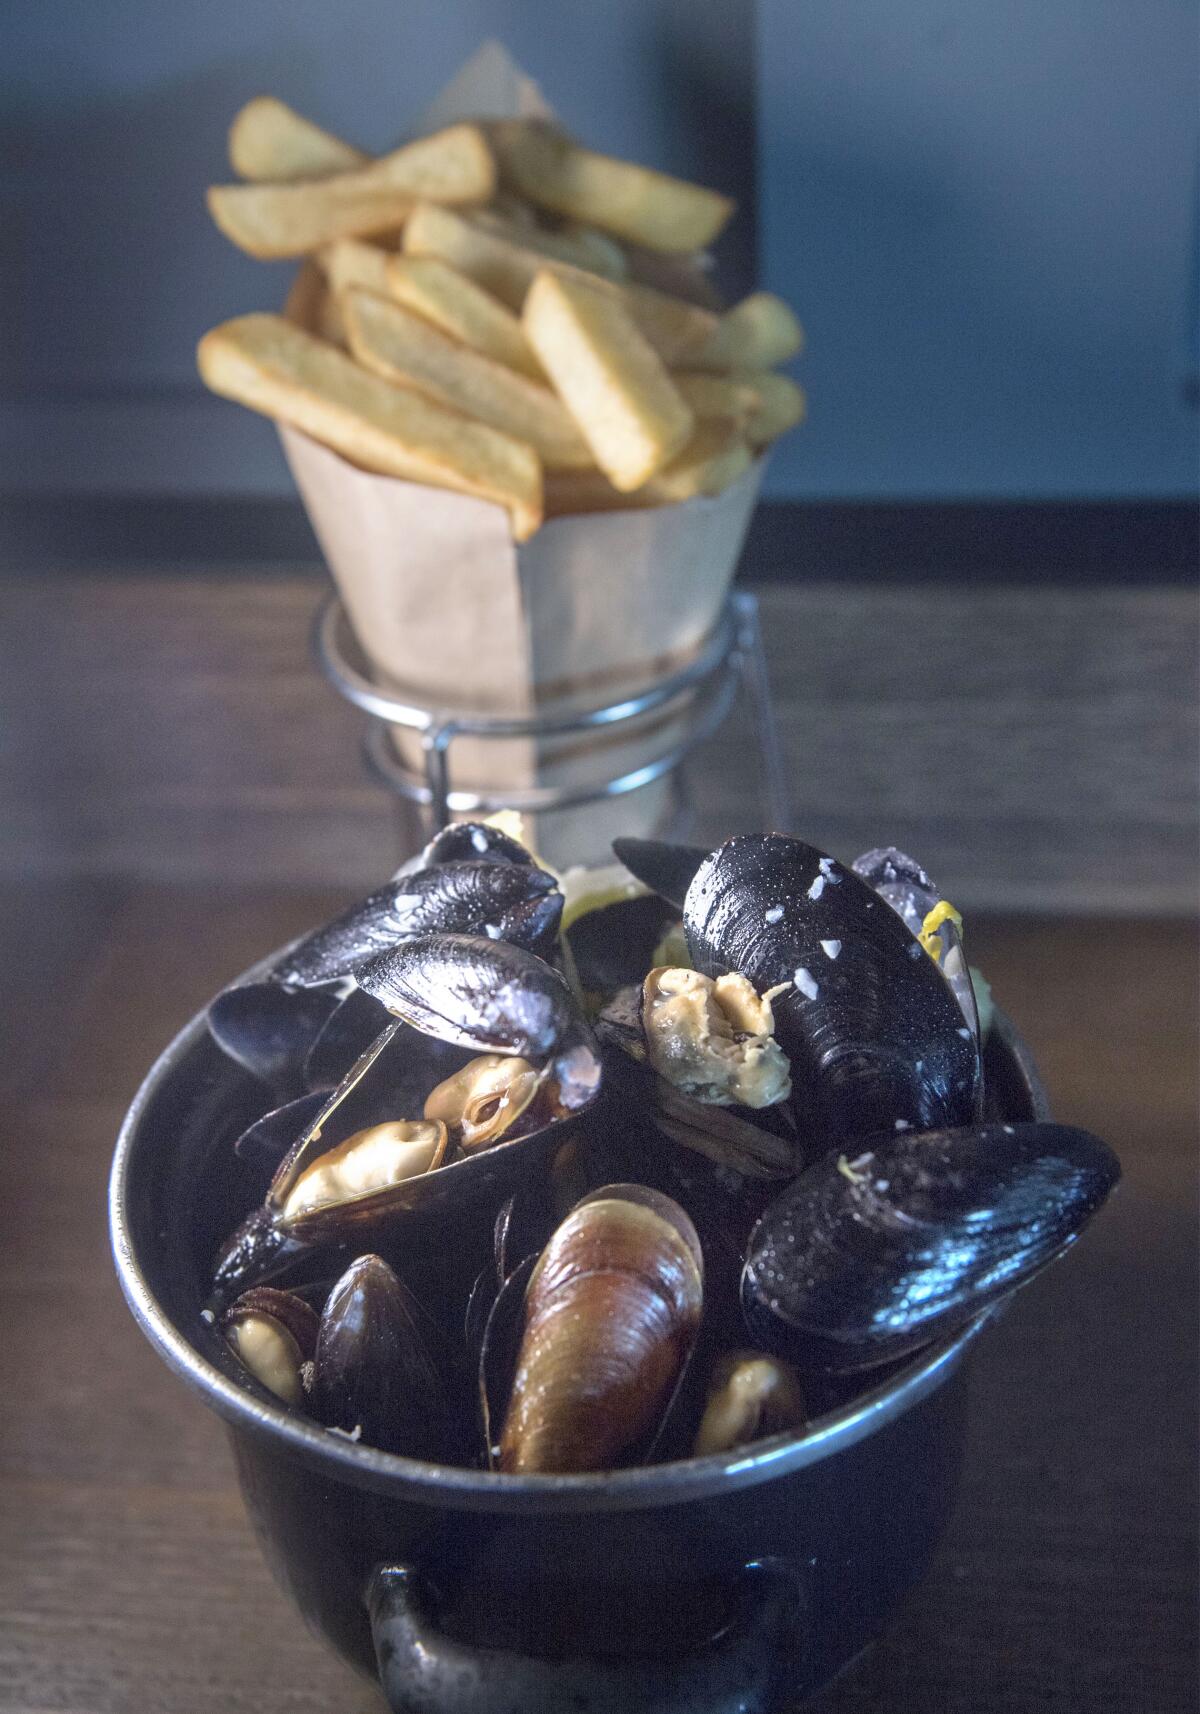 Moules frites, or mussels and fries, is the specialty at Brussels Bistro.